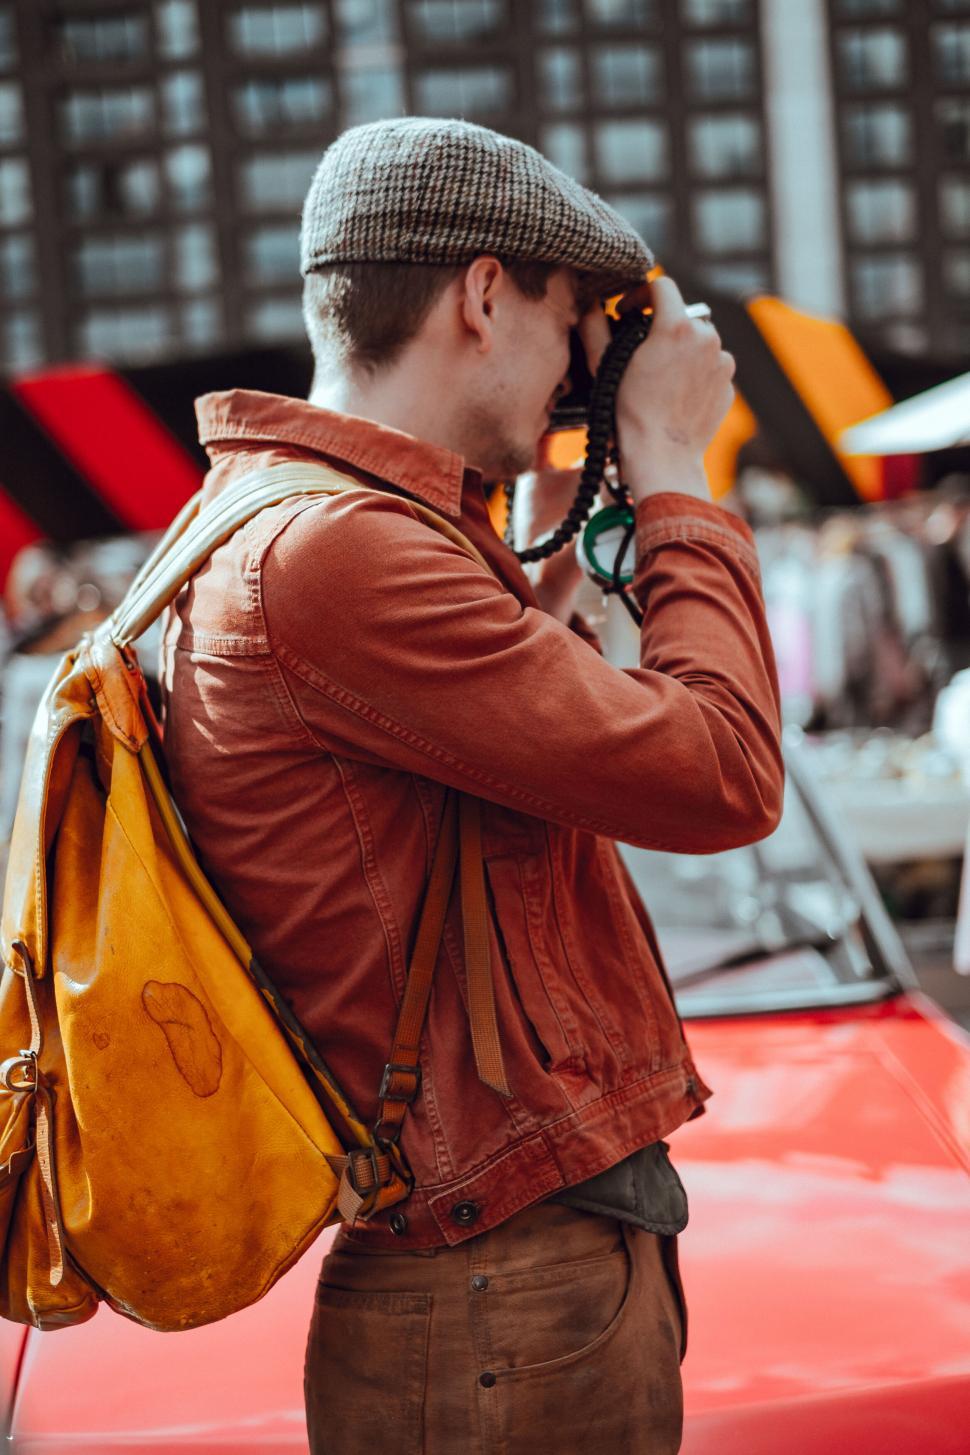 Free Image of Man with camera captures street scene 